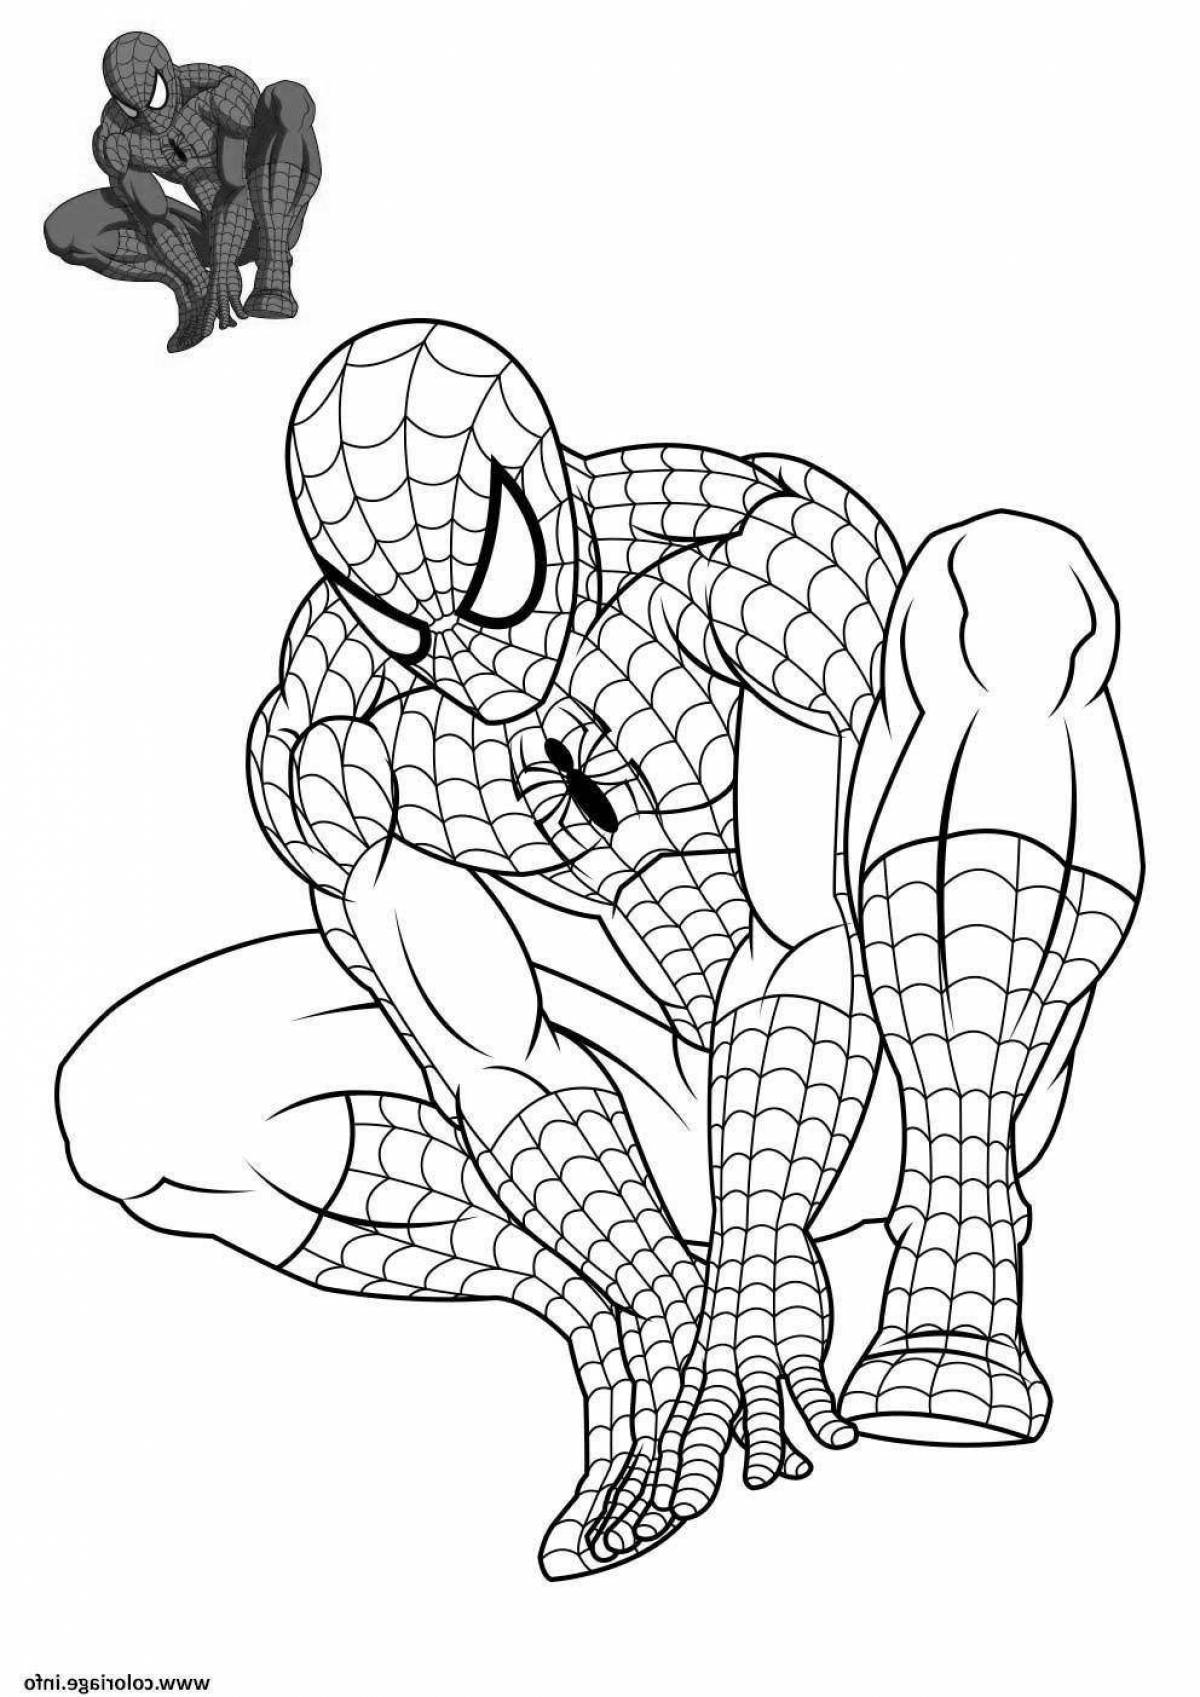 Spiderman's playful Christmas coloring book